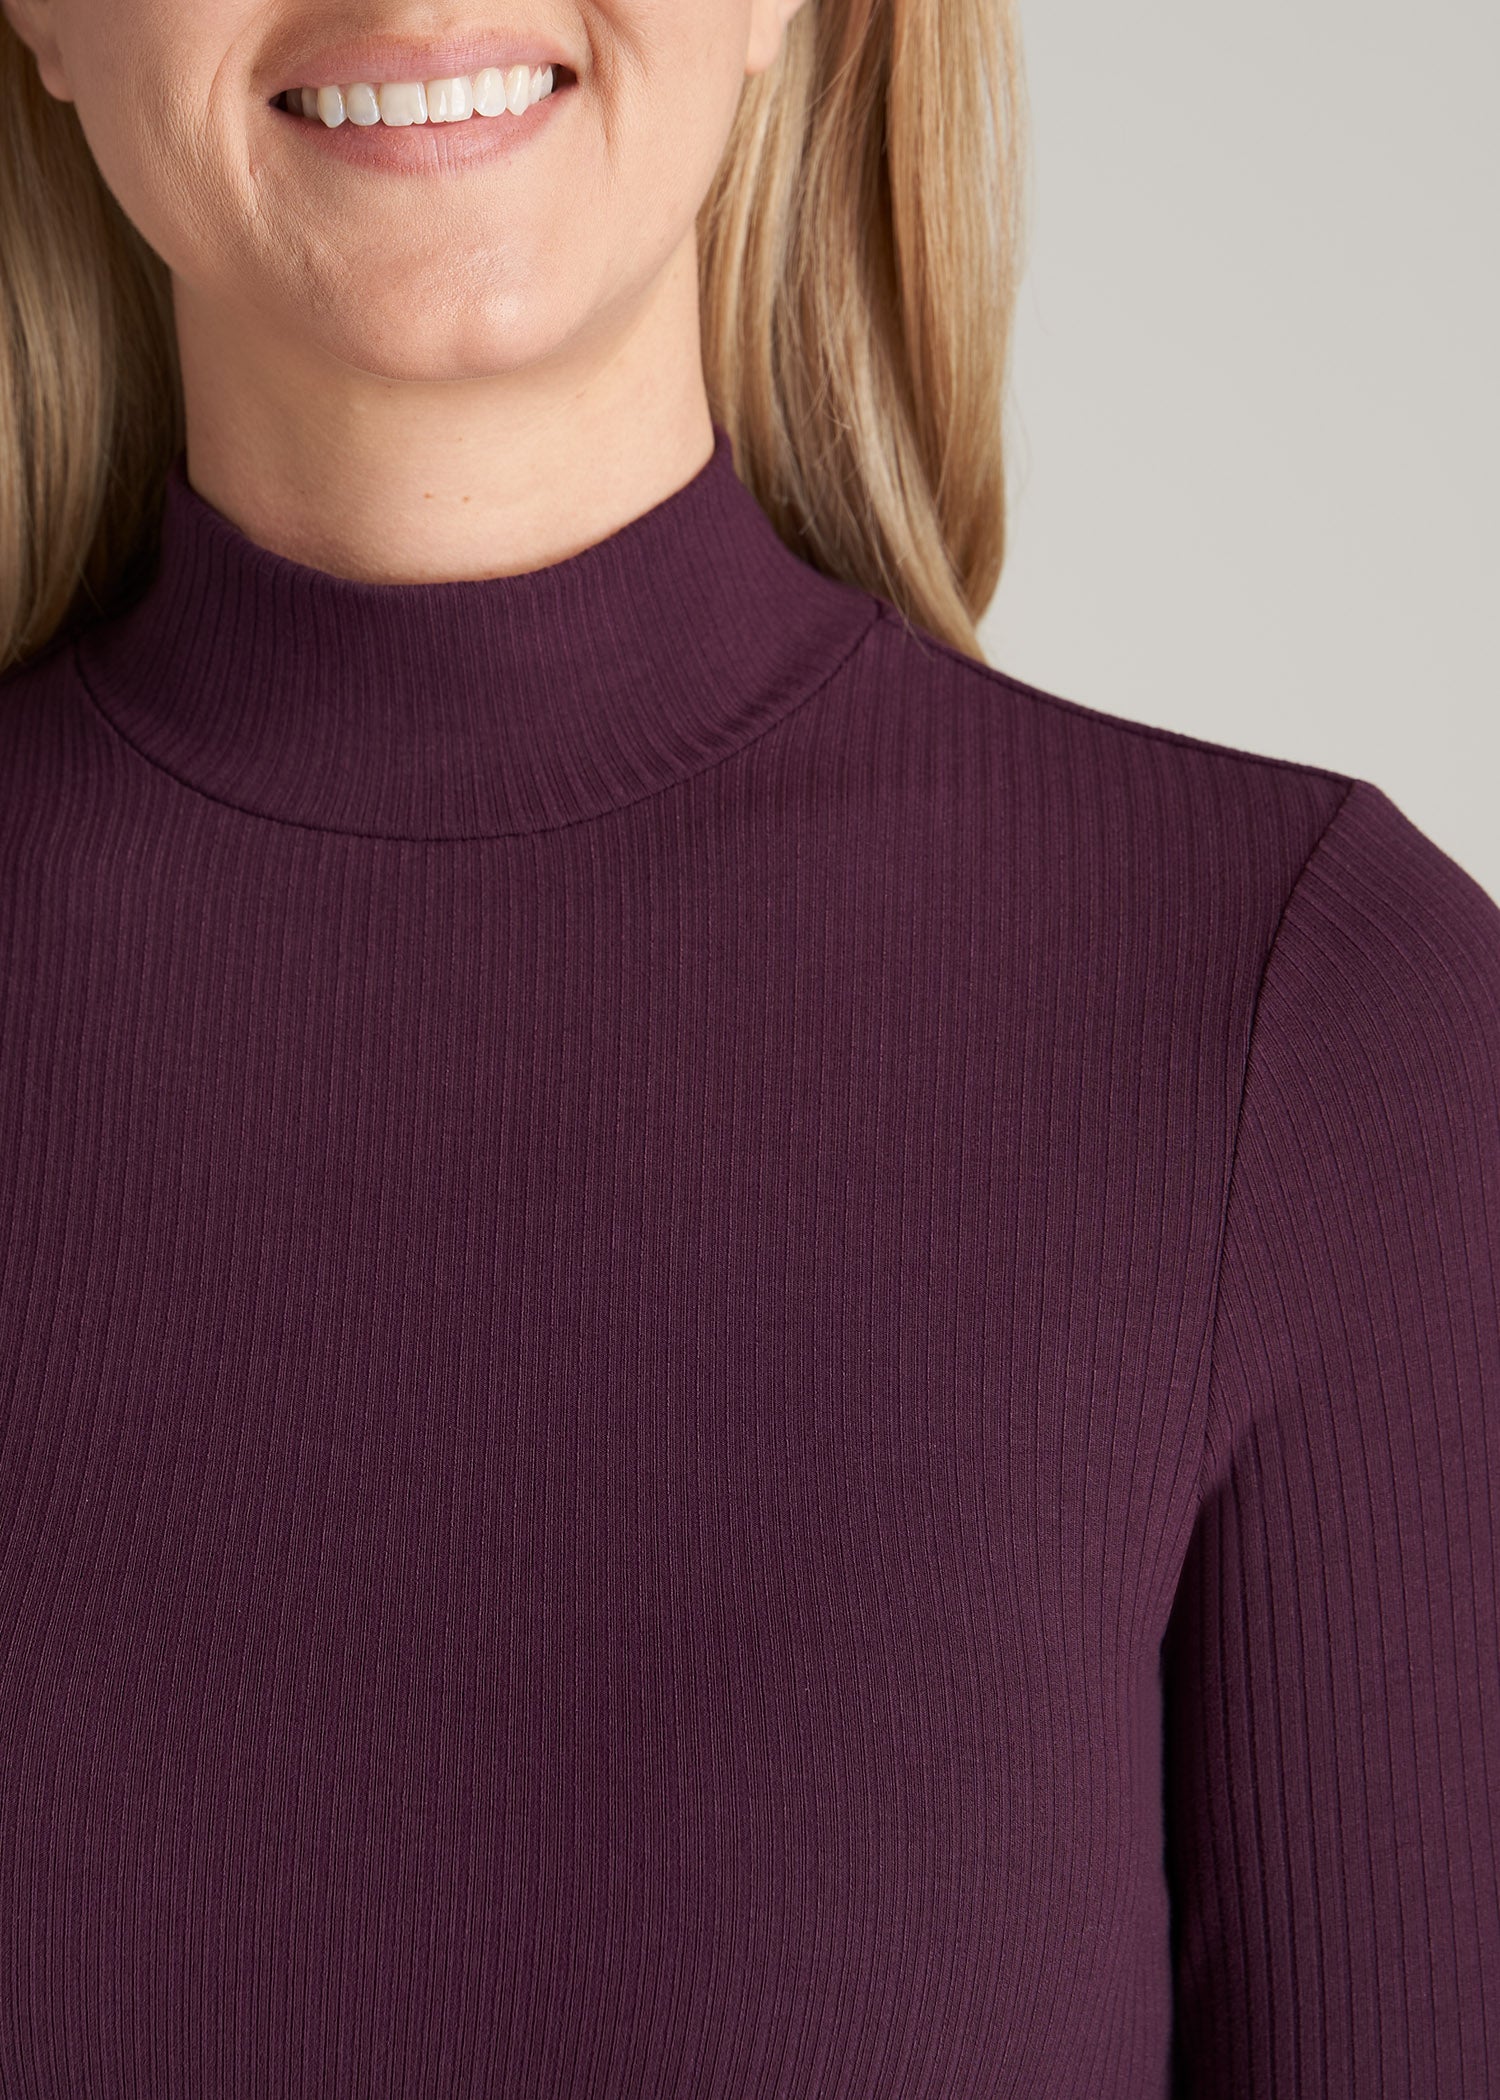       American-Tall-Women-LS-Mock-Neck-Ribbed-Top-Maroon-detail